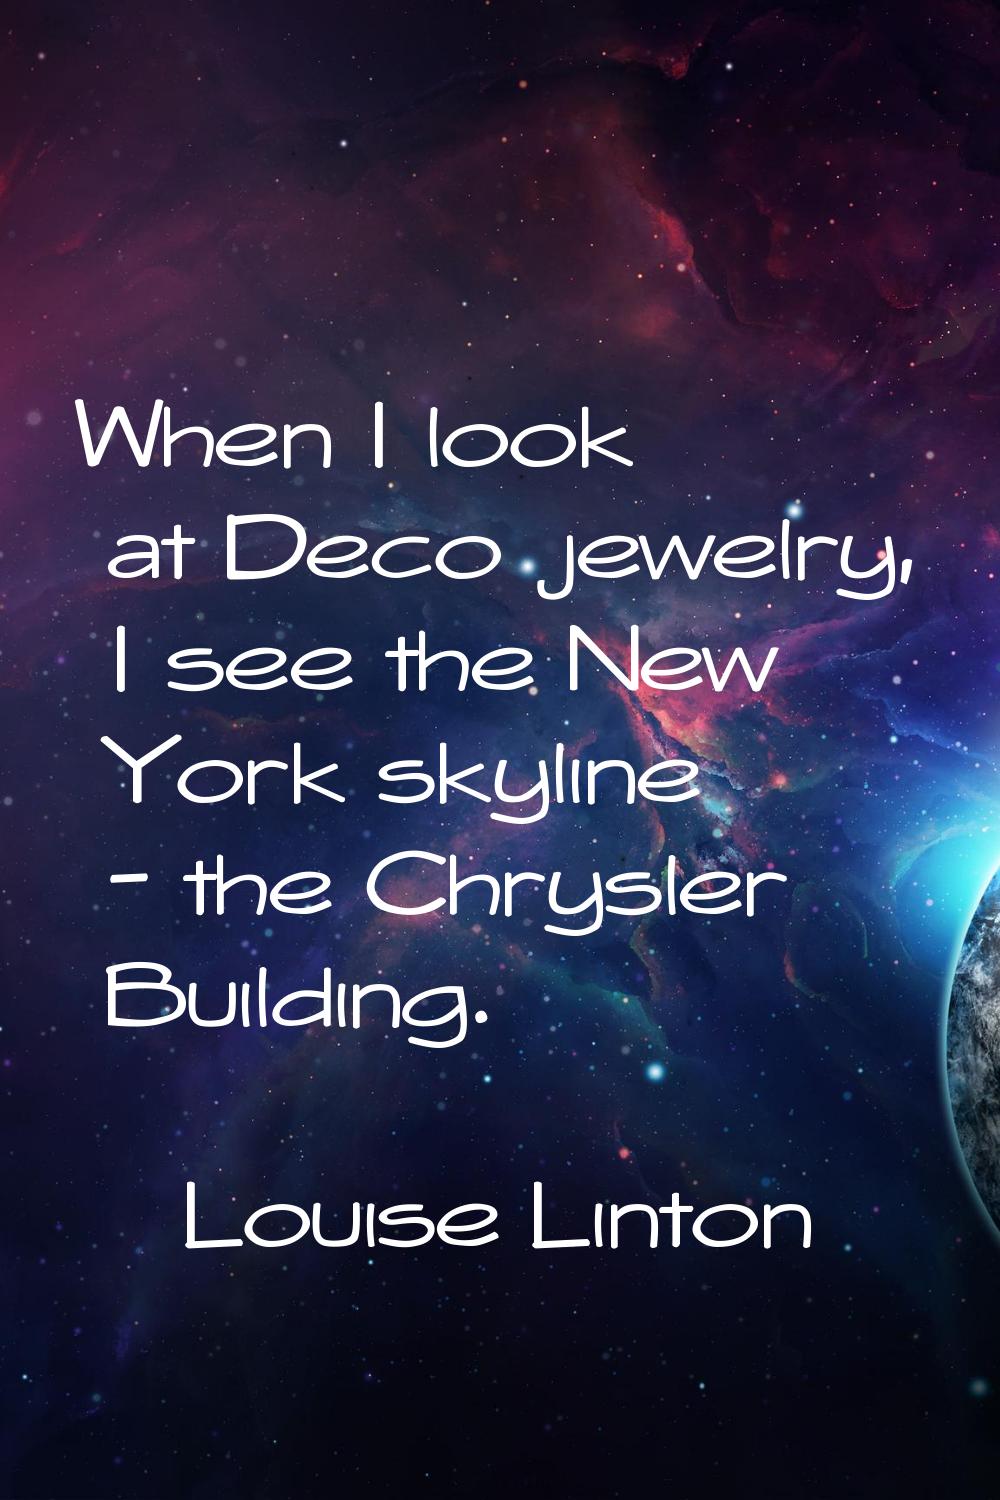 When I look at Deco jewelry, I see the New York skyline - the Chrysler Building.